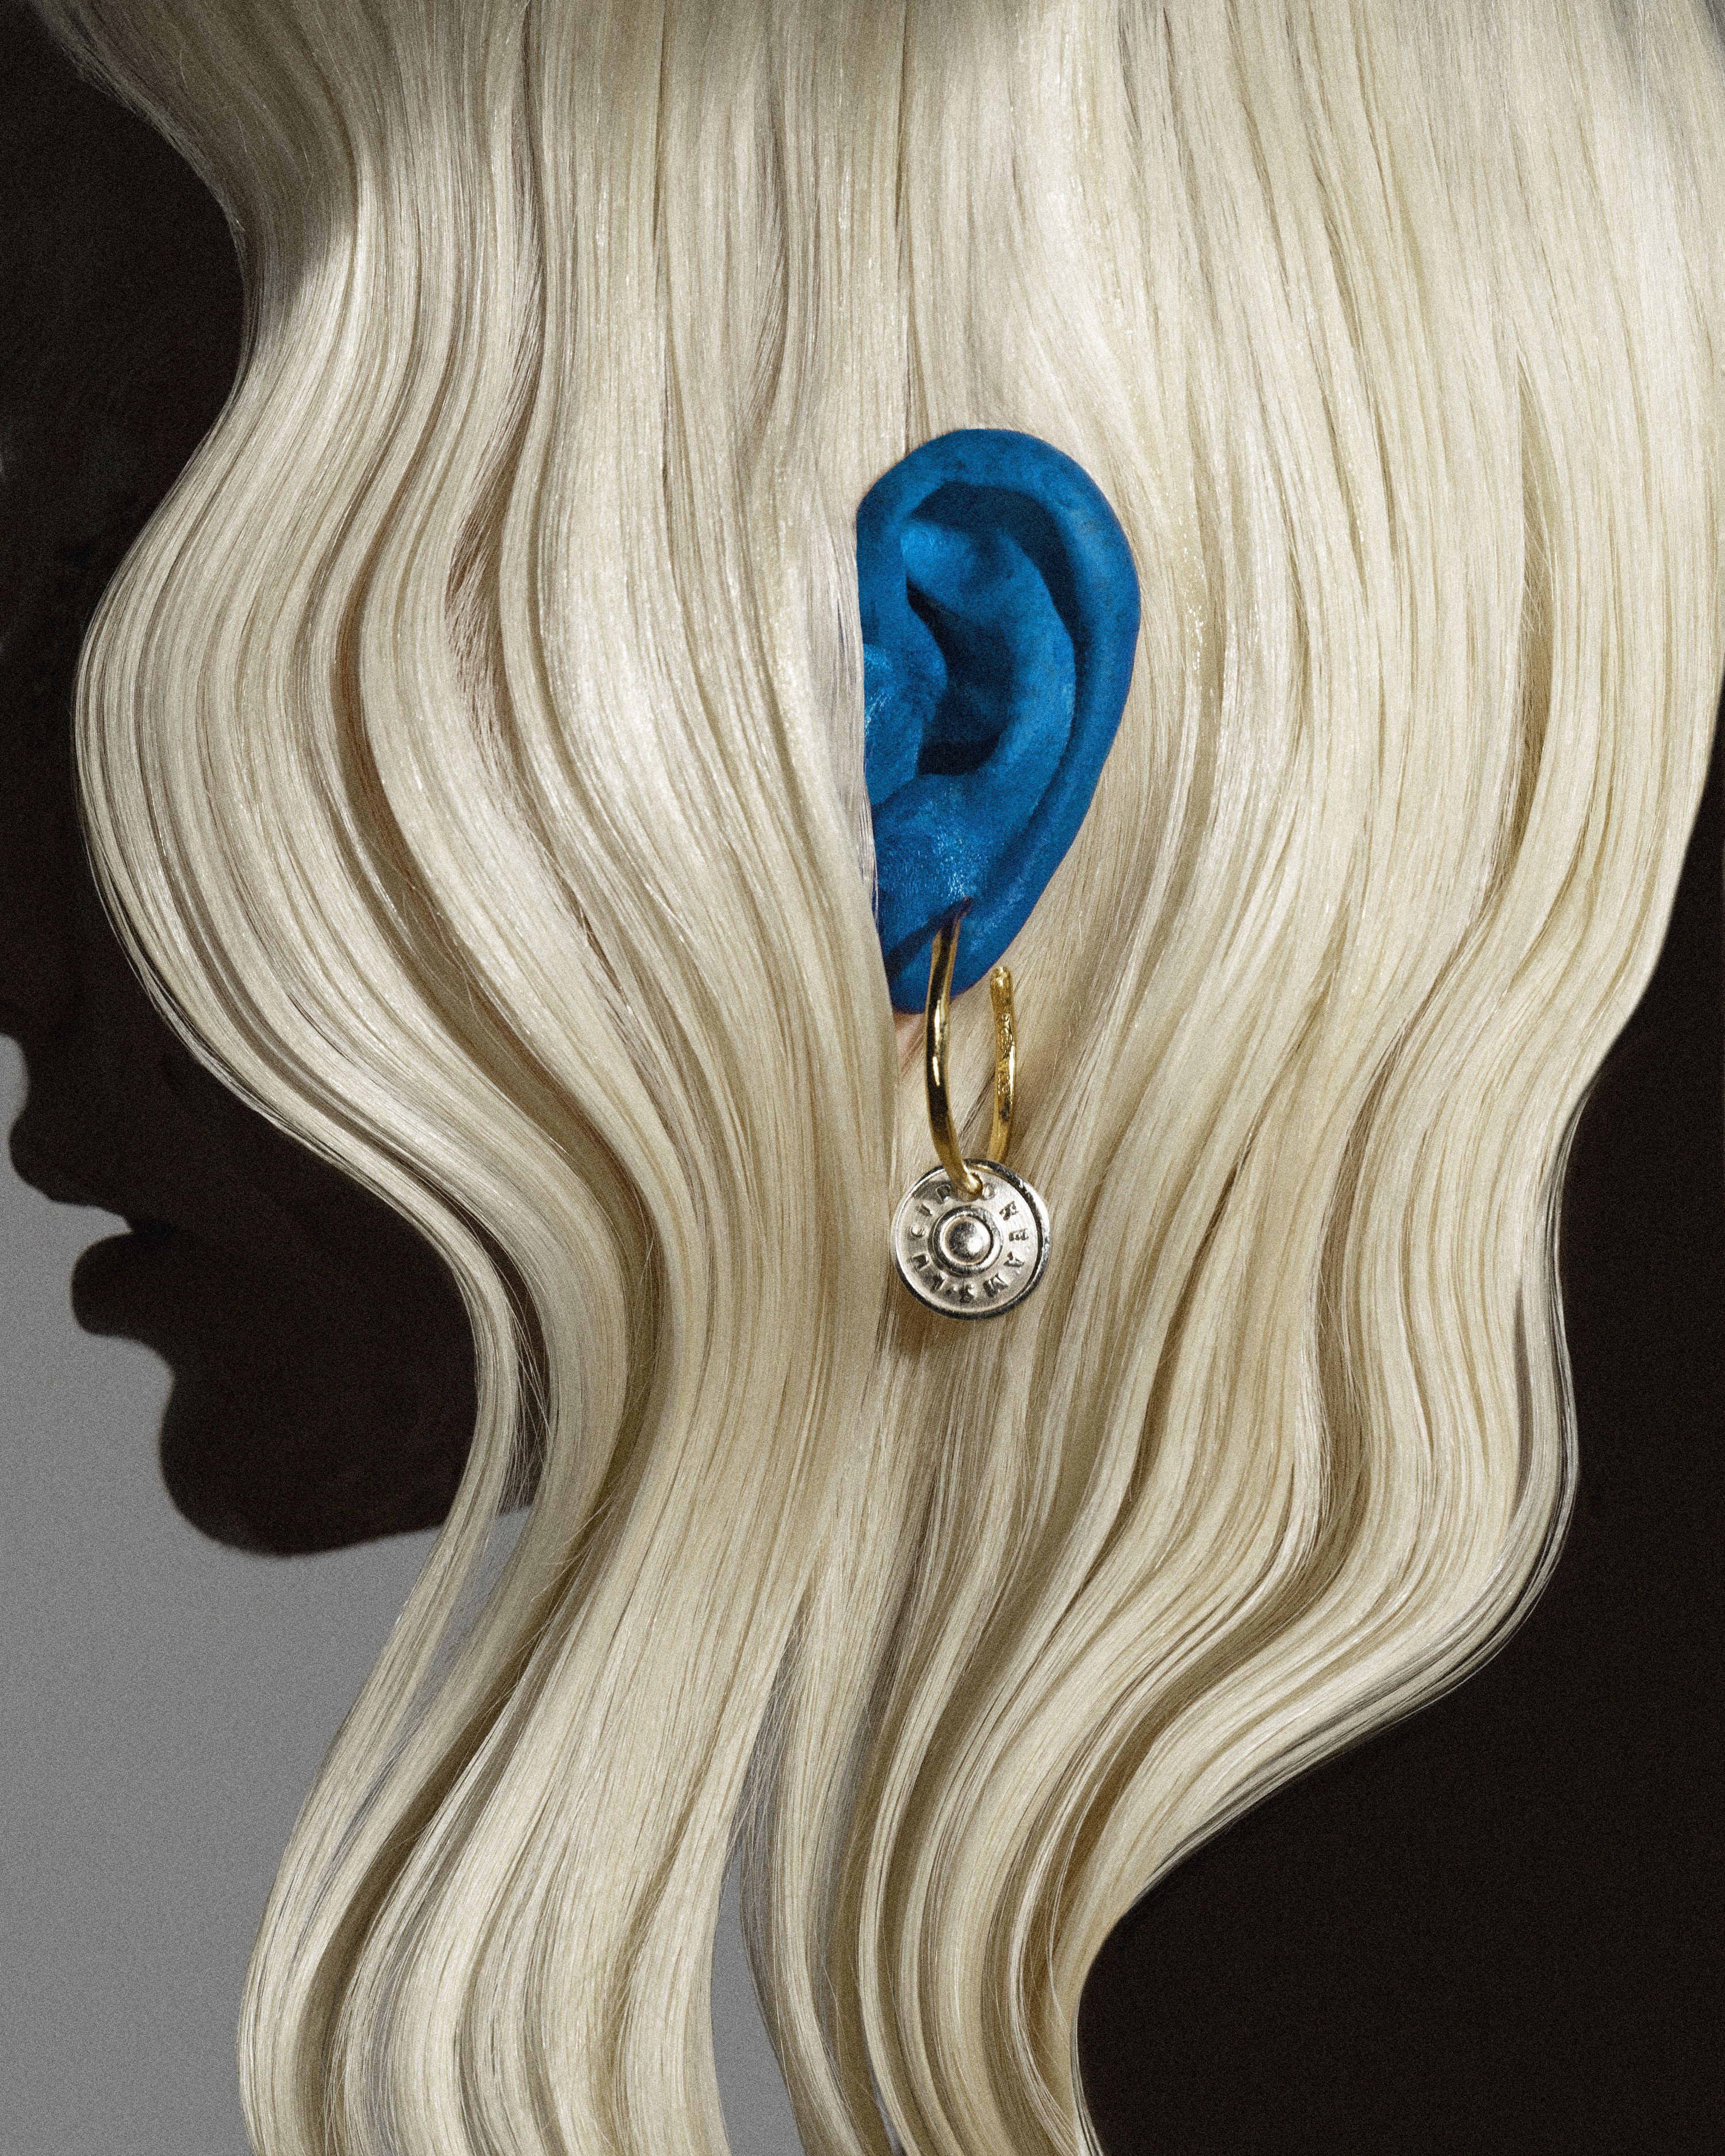 About THE EARRING
Honouring classical jeans symbols and surrealist references, this playful single earring is an elegant fusion of Façon Jacmin and Wouters & Hendrix's love for trompe l'oeil. Exuding a unique artistry, every Wouters & Hendrix piece is handmade by a team of goldsmiths in our Antwerp atelier. Every earring comes in a jeans pocket as packaging.